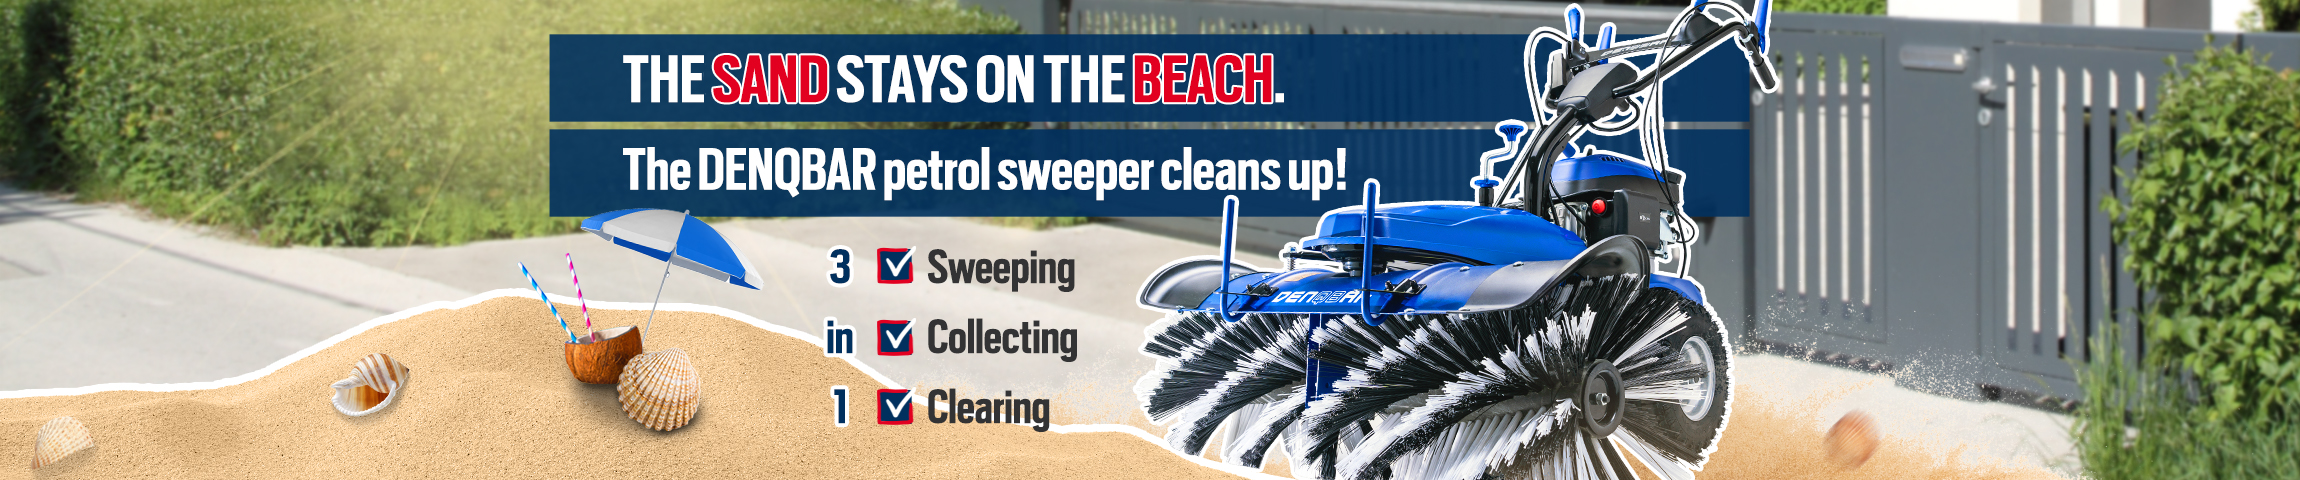 The sand stays on the Beach. The DENQBAR petrol sweeper cleans up!